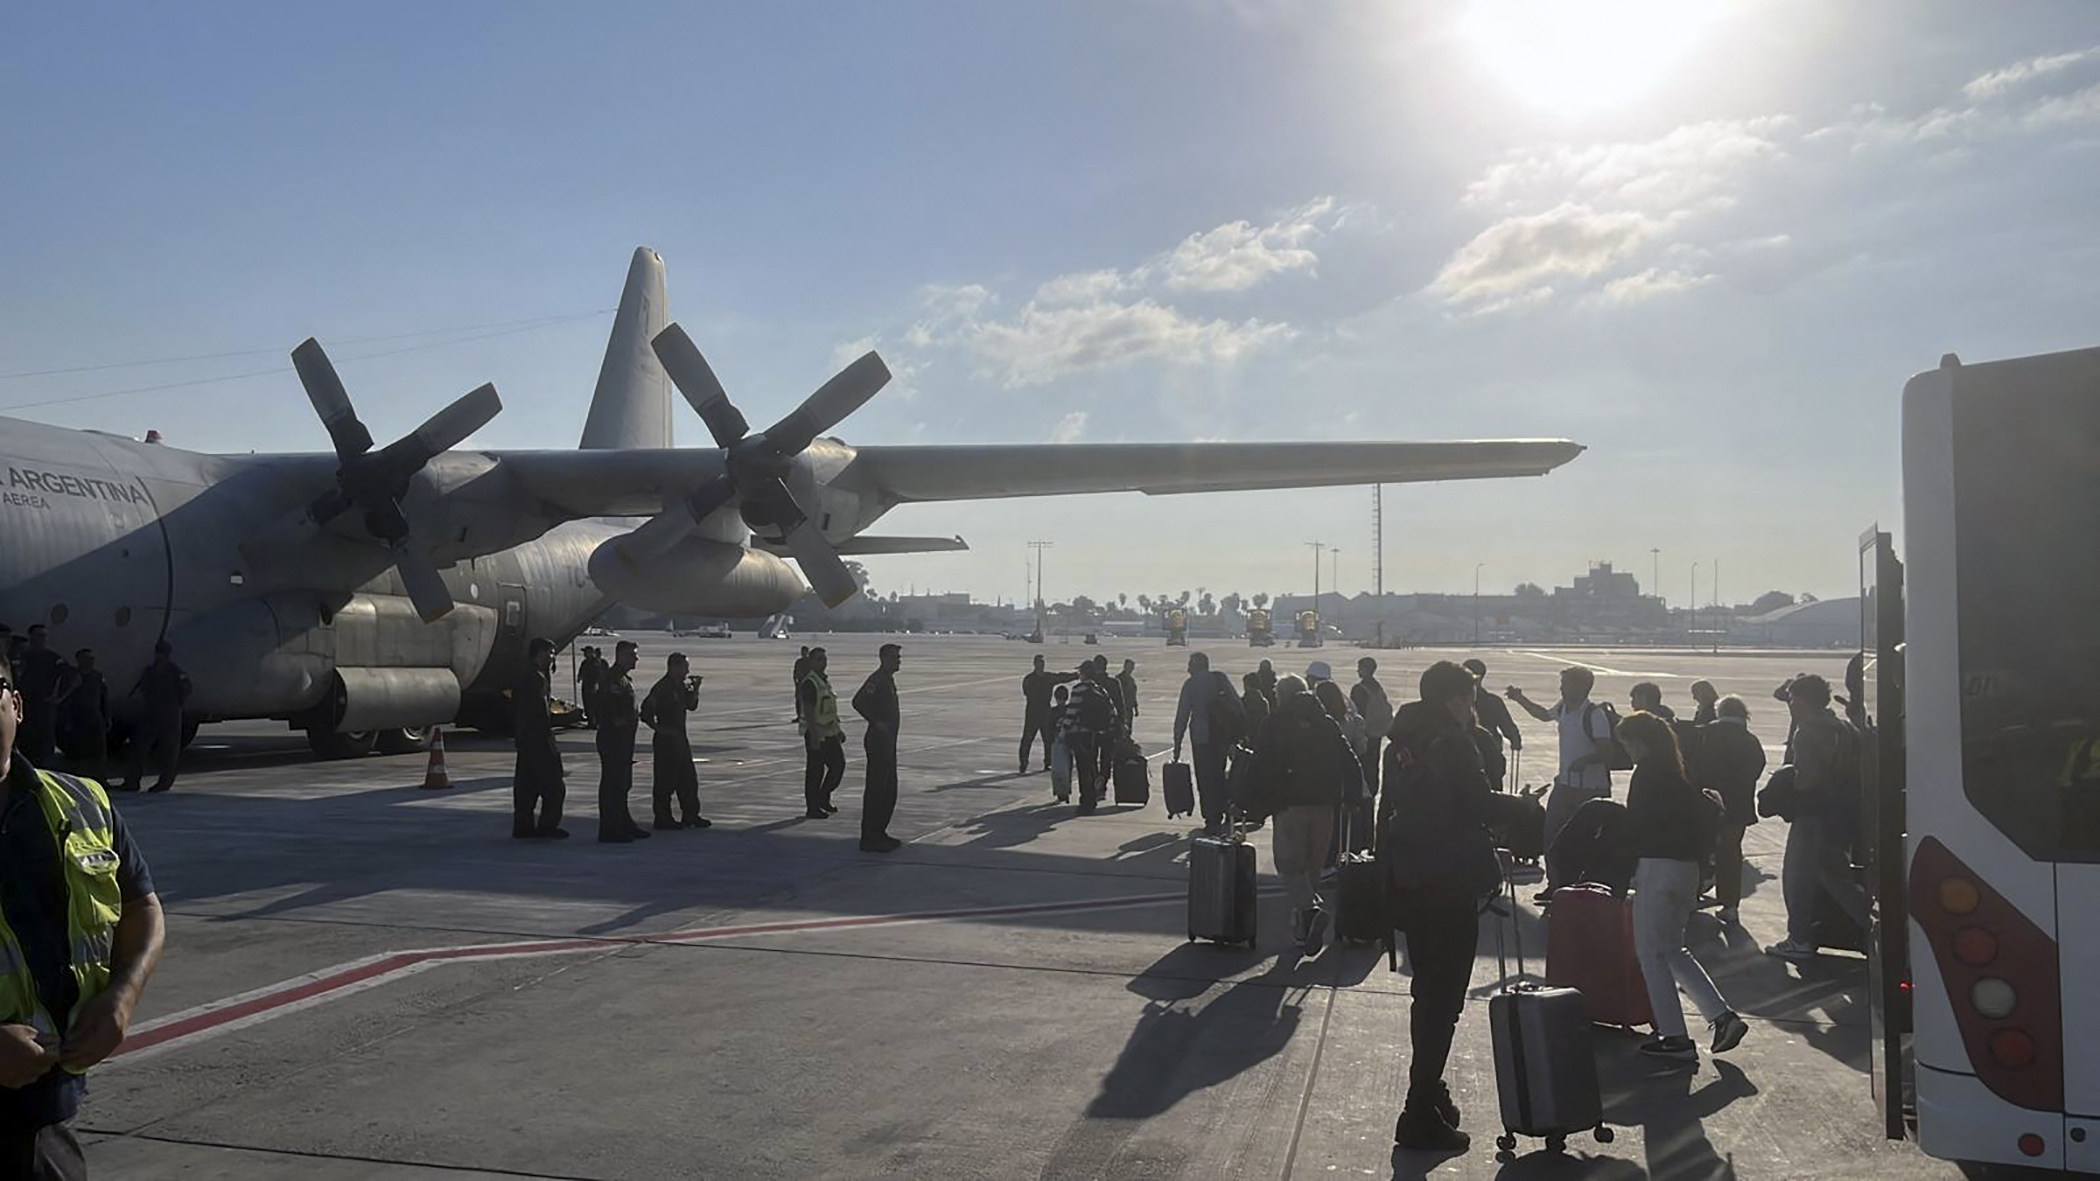 Argentine citizens boarding an Argentine Air Force C-130 Hercules aircraft at Ben Gurion International Airport in Tel Aviv, Israel on Thursday. Photo: Argentina’s Foreign Ministry via AFP